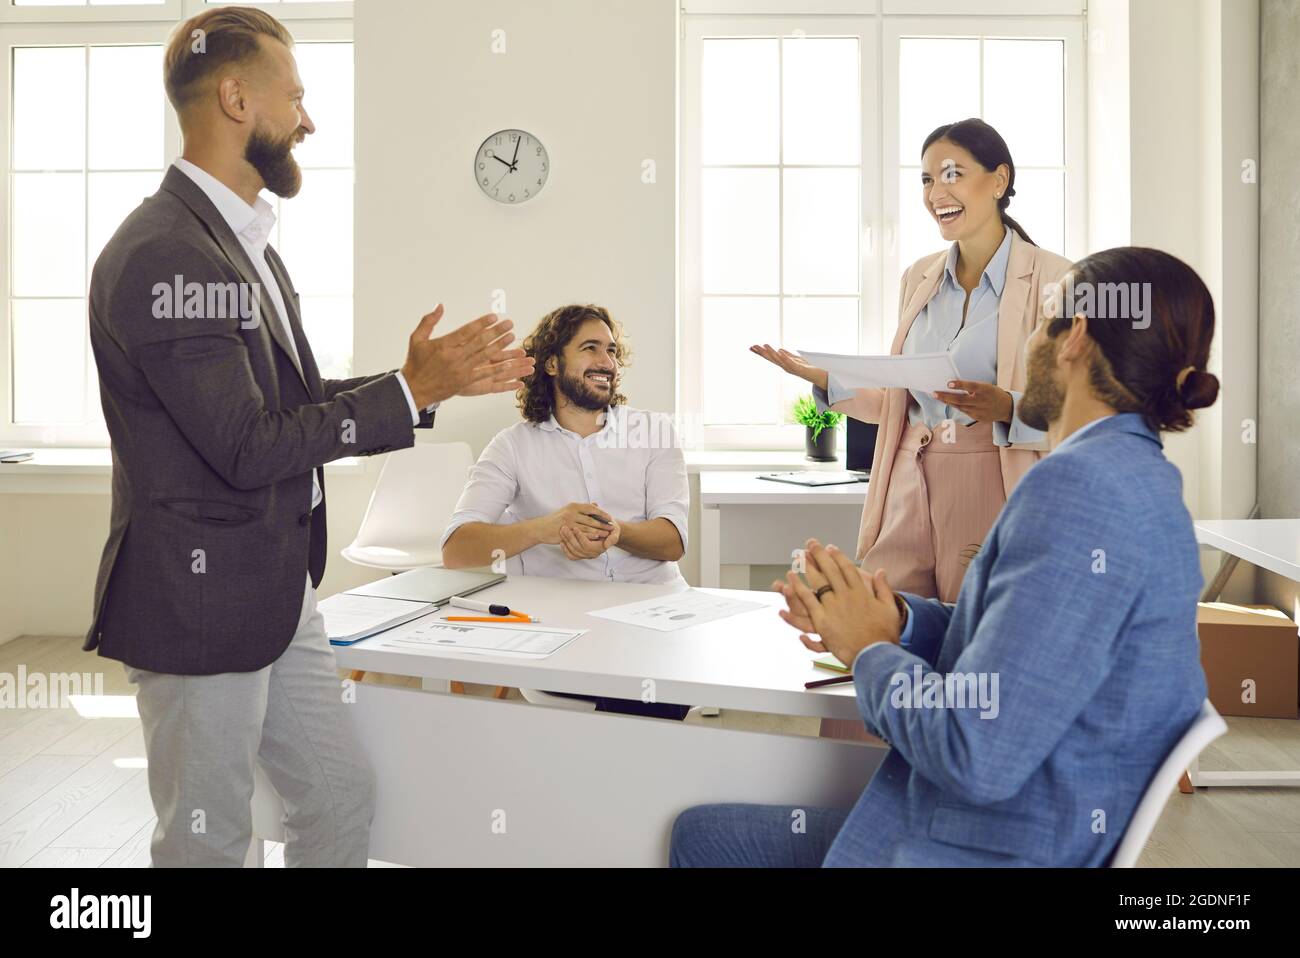 Group of male colleagues applauding happy woman for presentation in business meeting Stock Photo